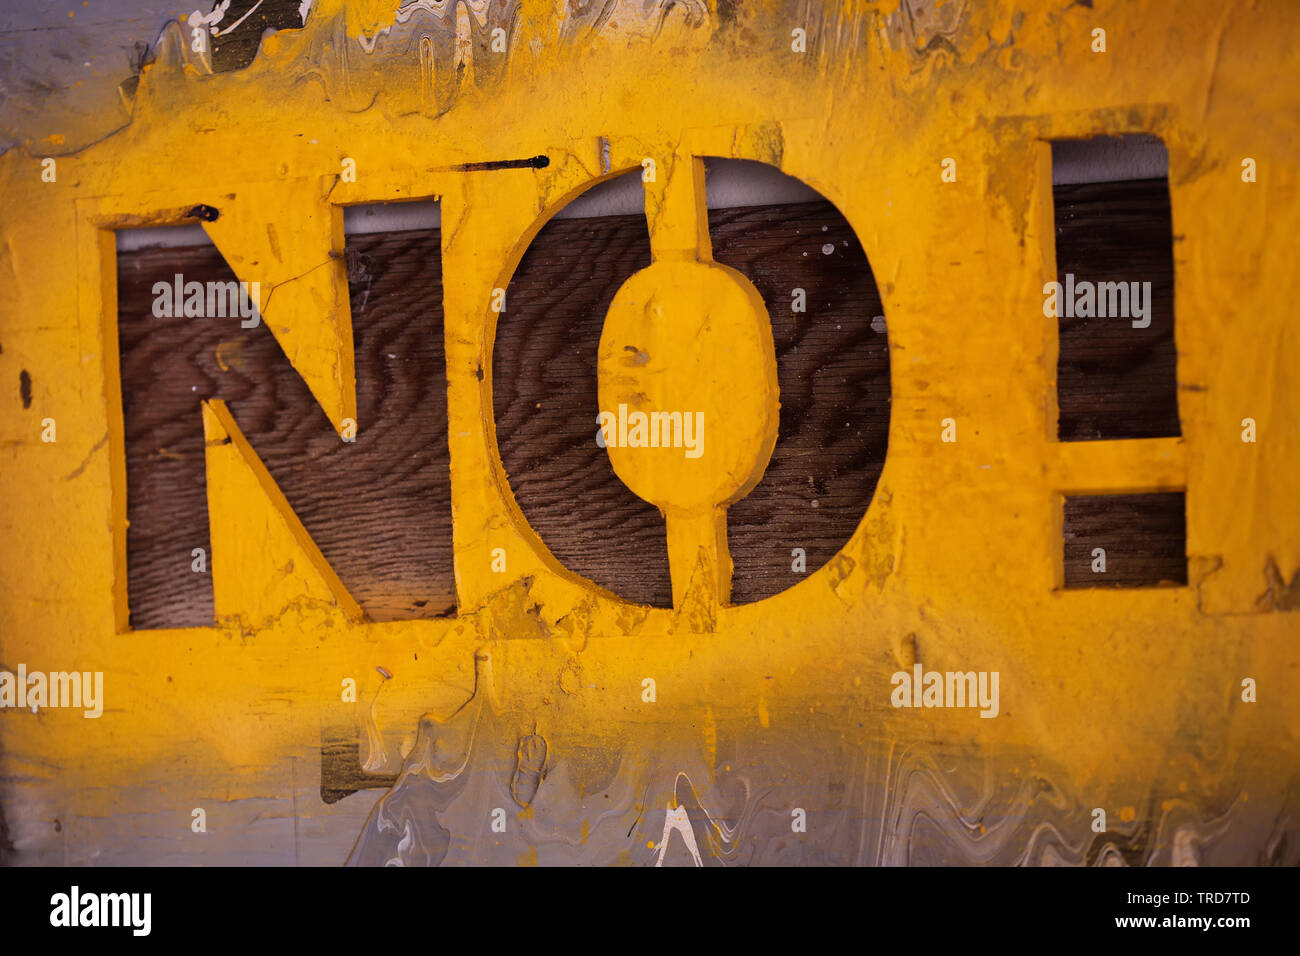 Stencil font signage with many layers of paint and textures with the words No! and yellow spray paint. Stock Photo